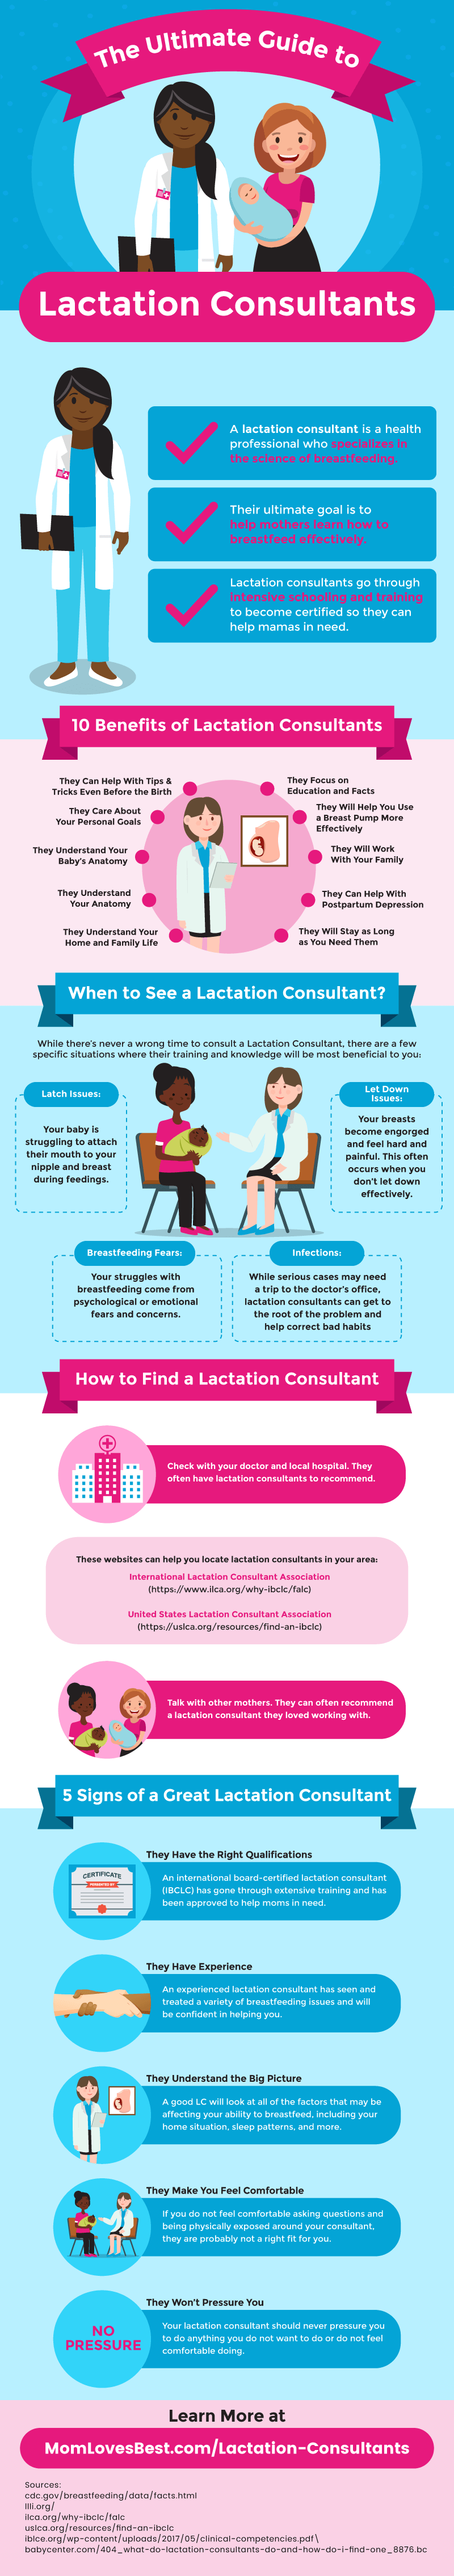 The Ultimate Guide to Lactation Consultants